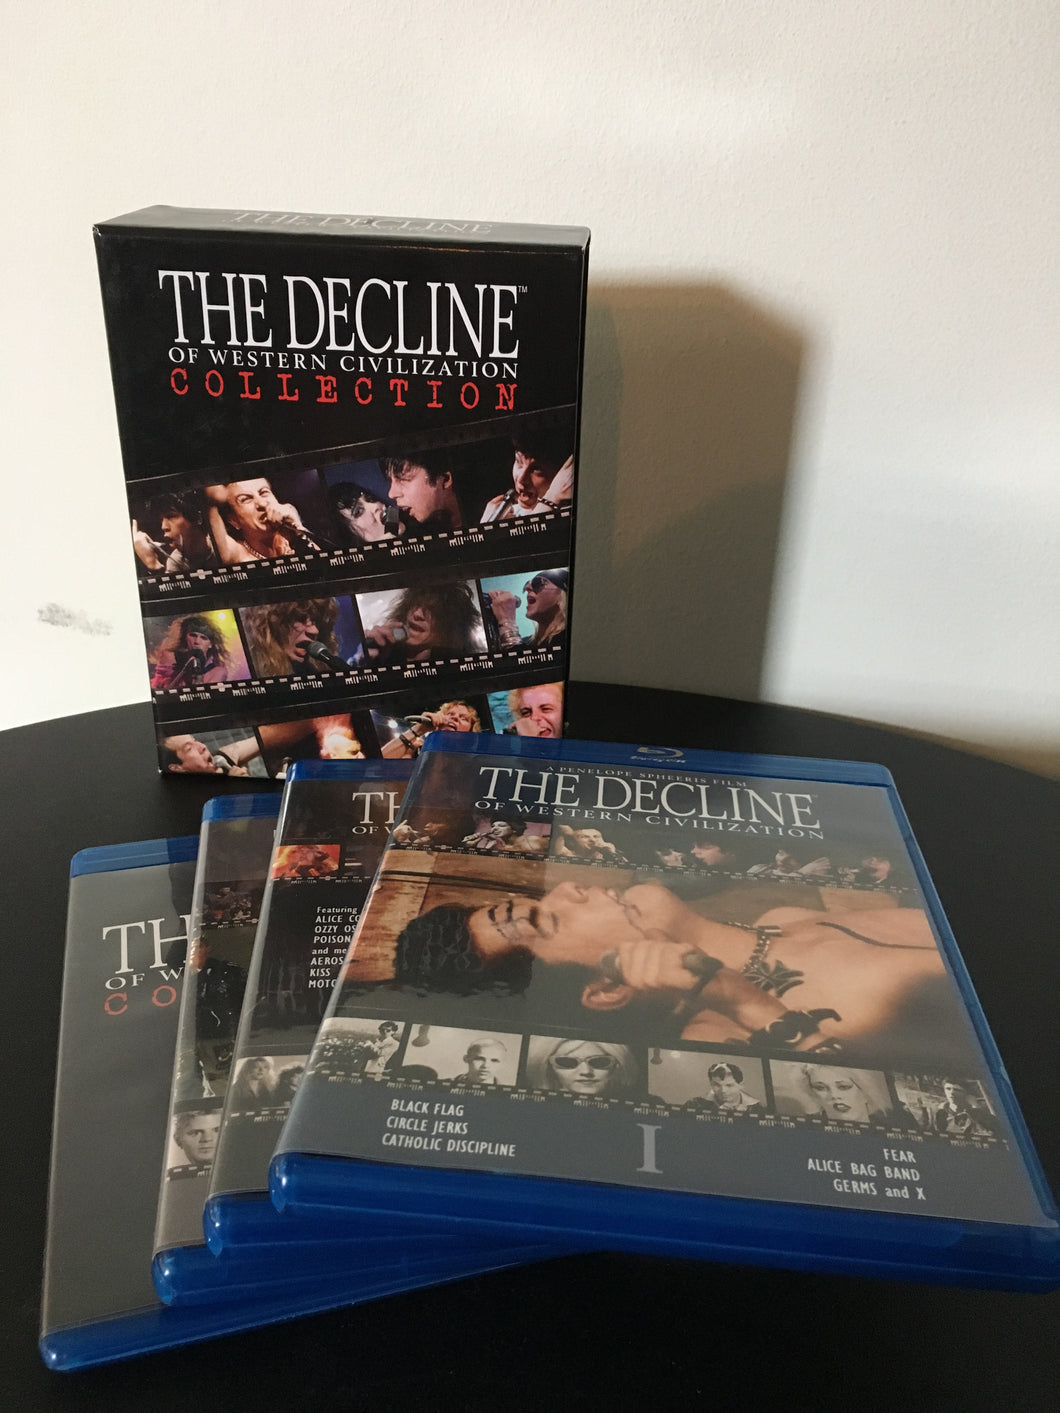 DECLINE OF WESTERN CIVILIZATION COLLECTION 4 DISC BLU-RAY BOX SET (USED)